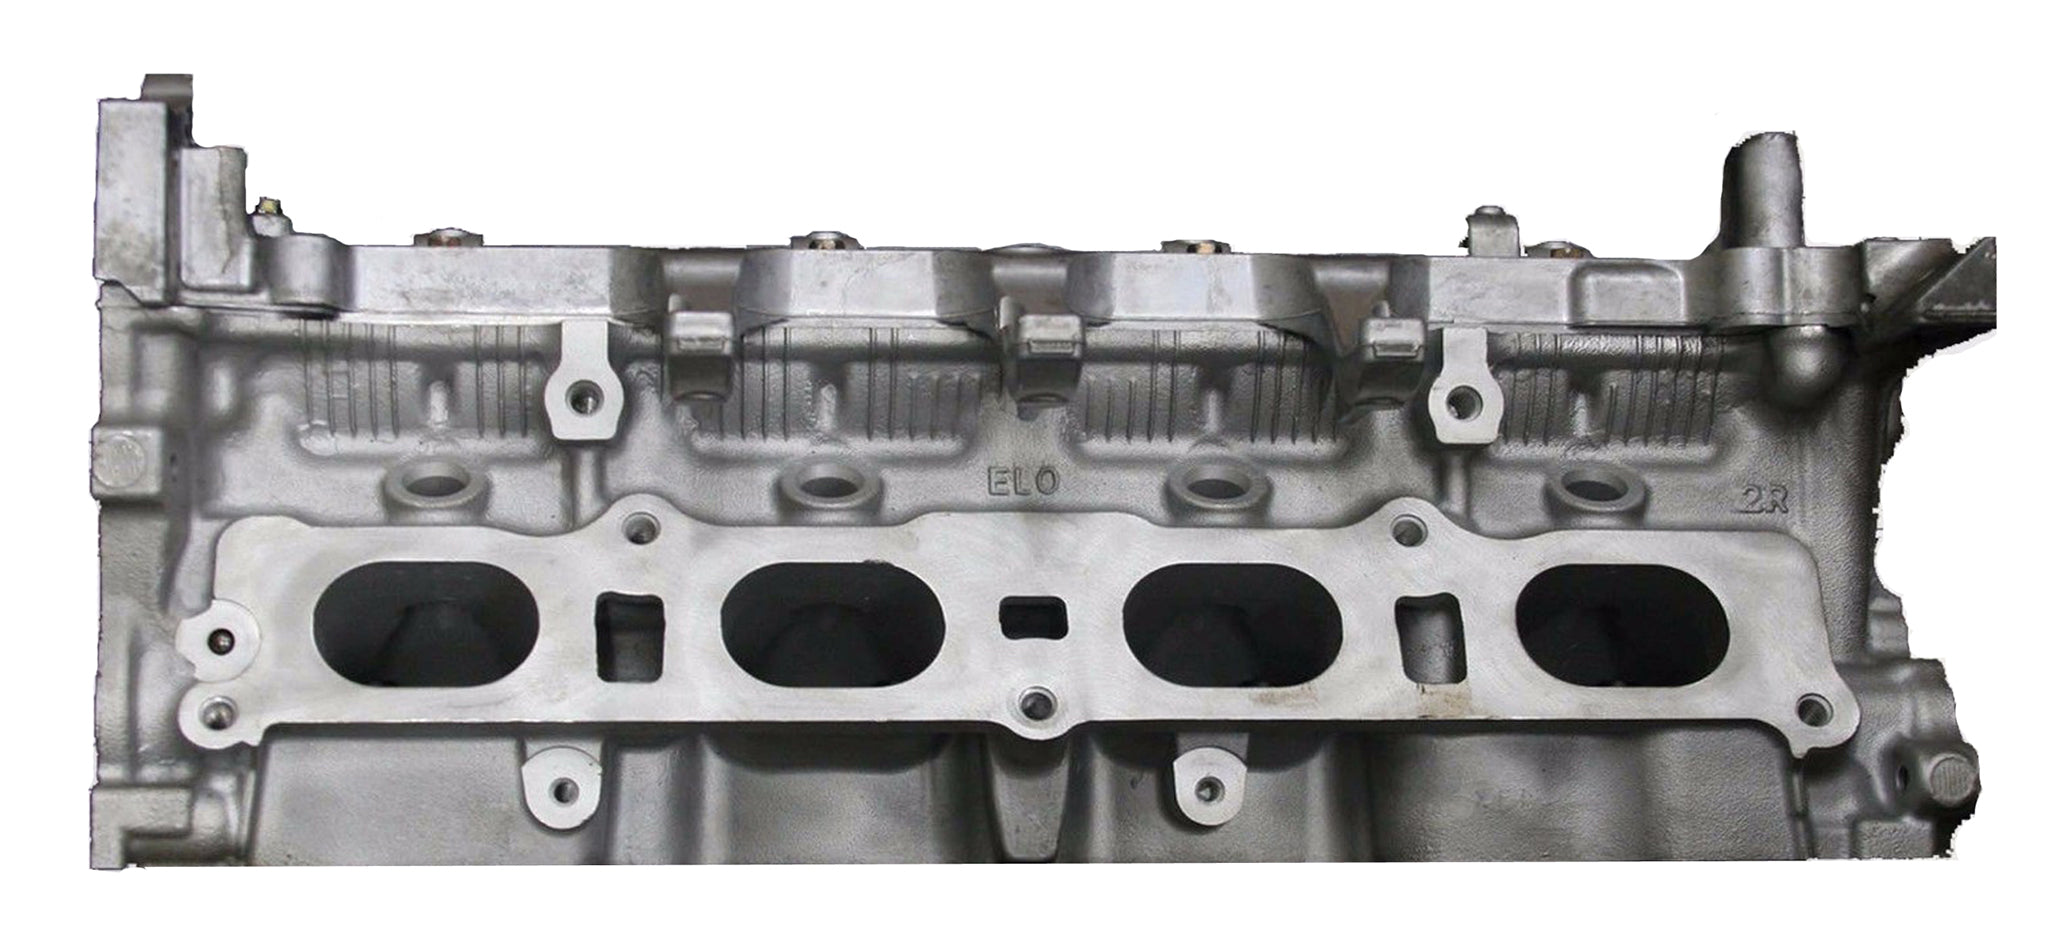 1985-1993 Toyota MR2 1.6L 4AGELC DOHC Super Charged MFI W/smog whole Casting # S11